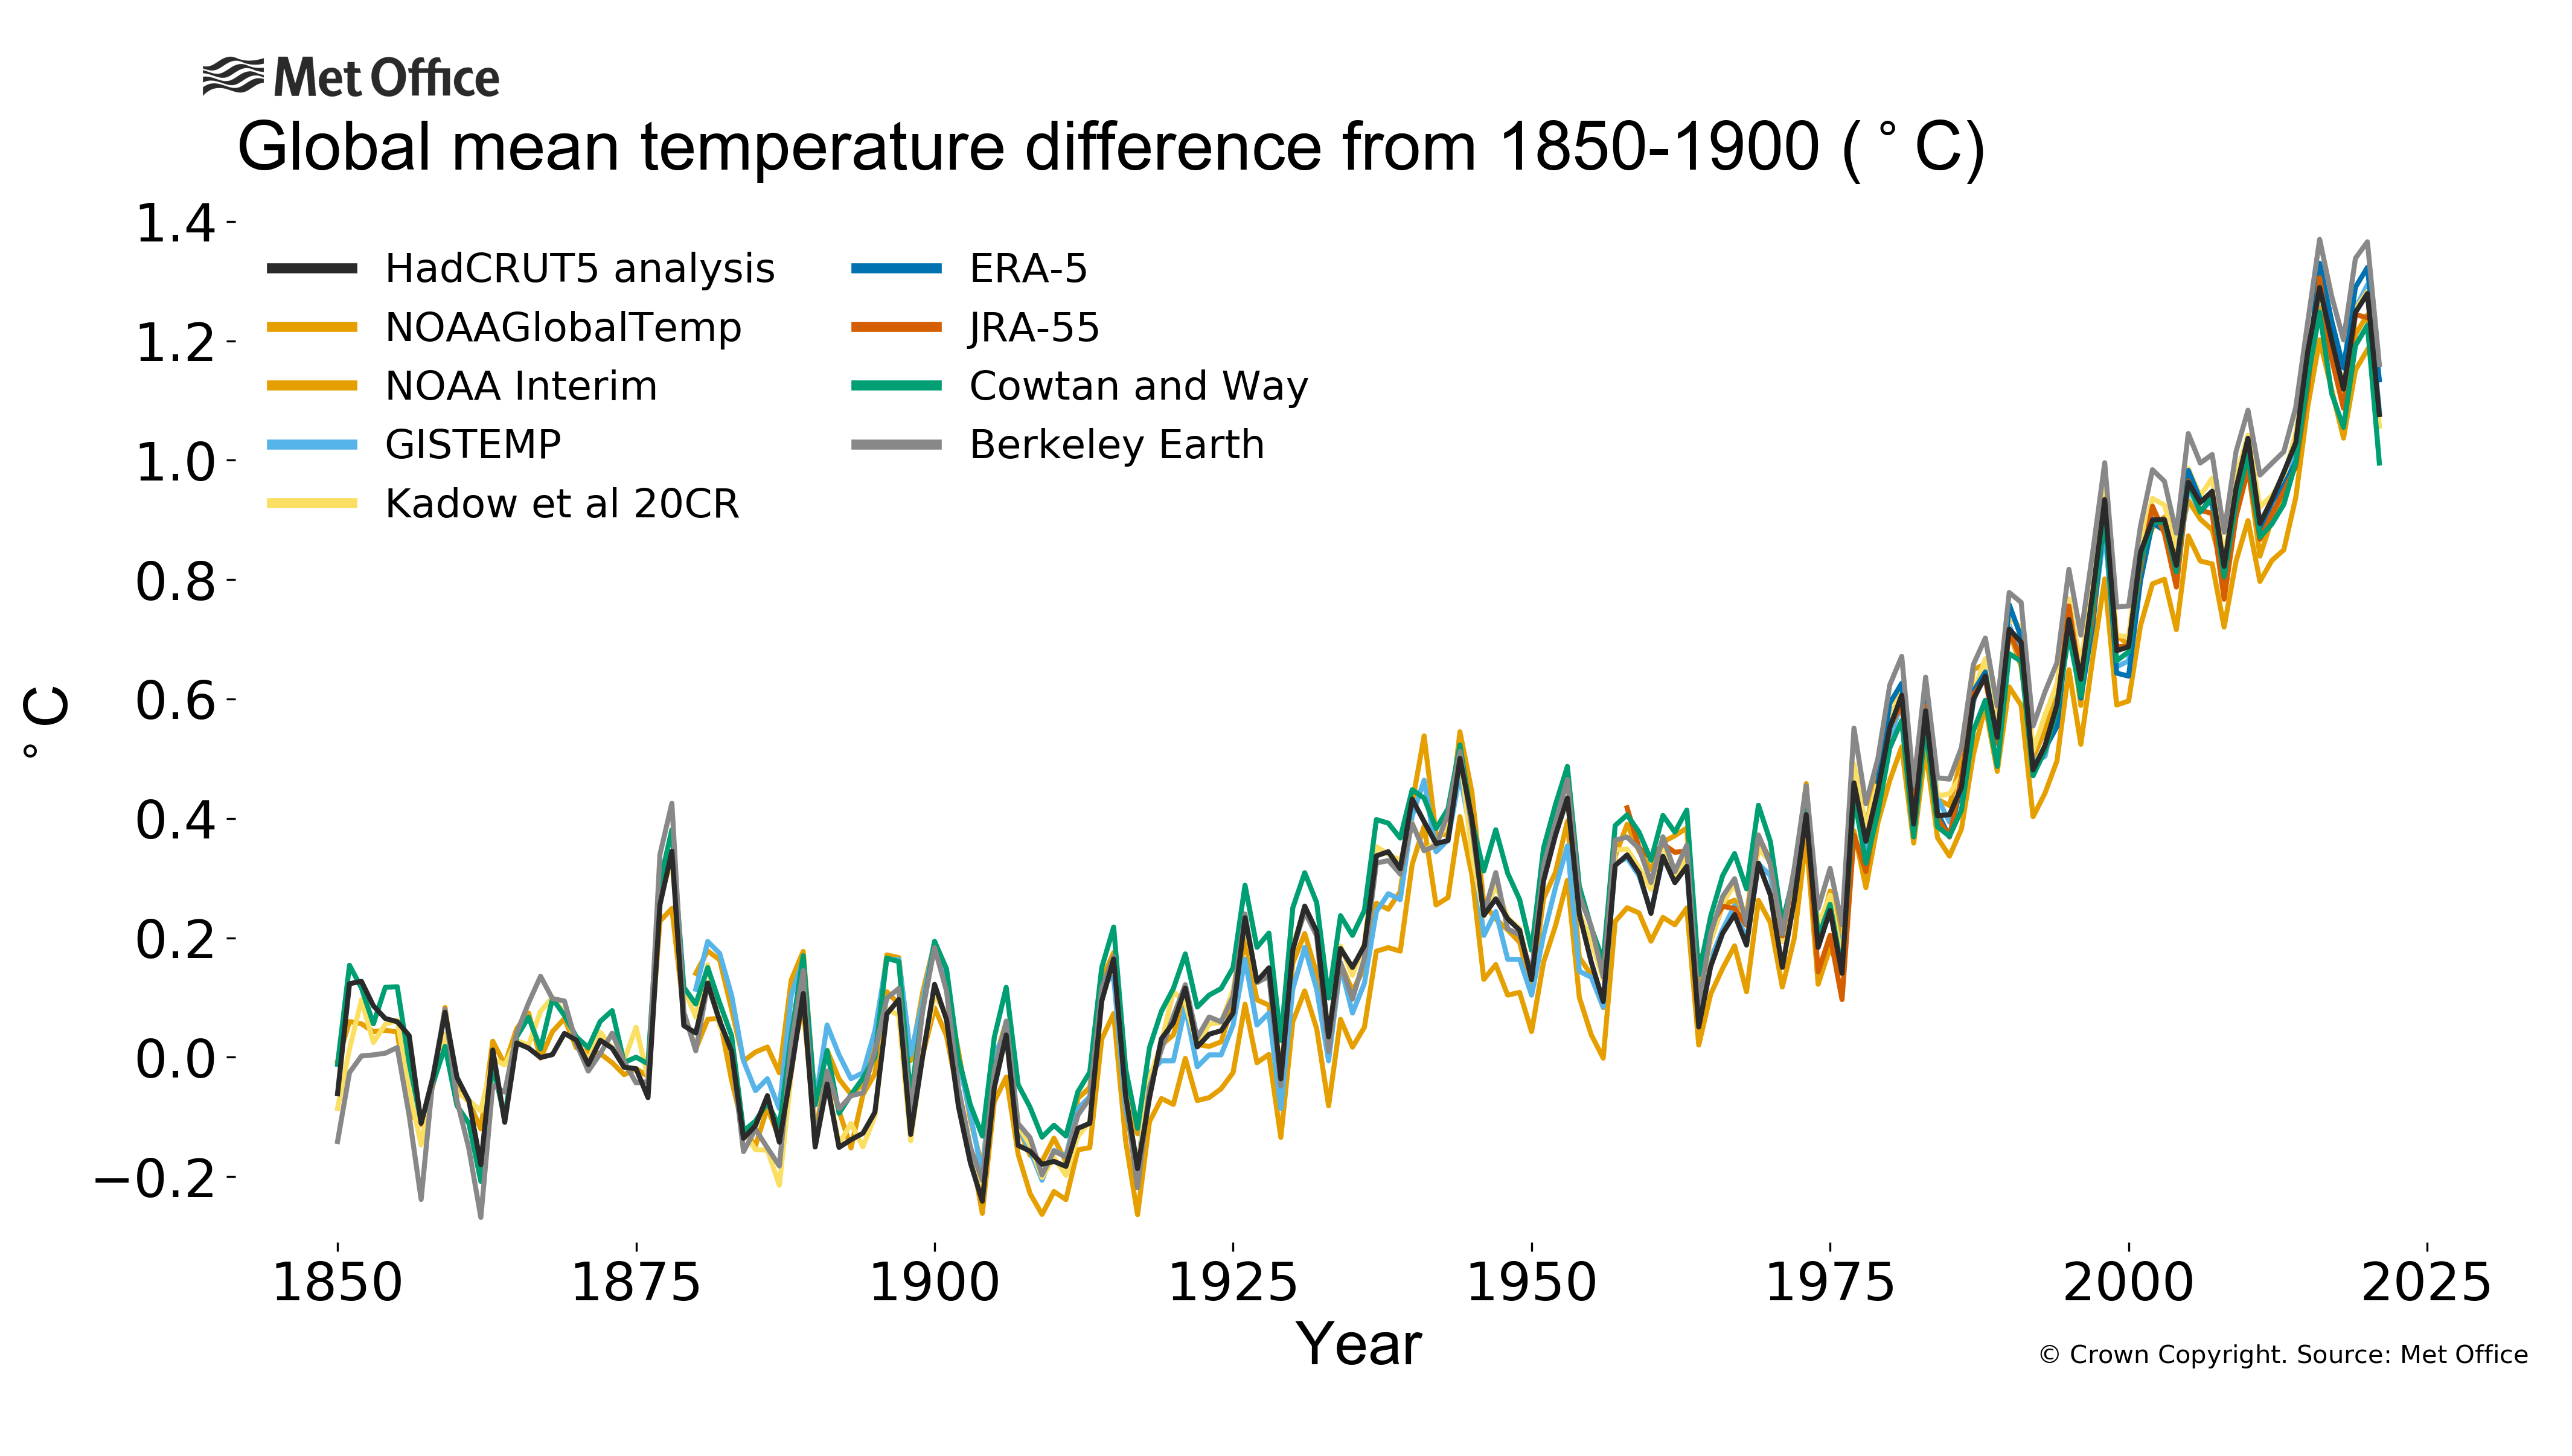 
Annual global mean temperature difference from pre-industrial conditions.
